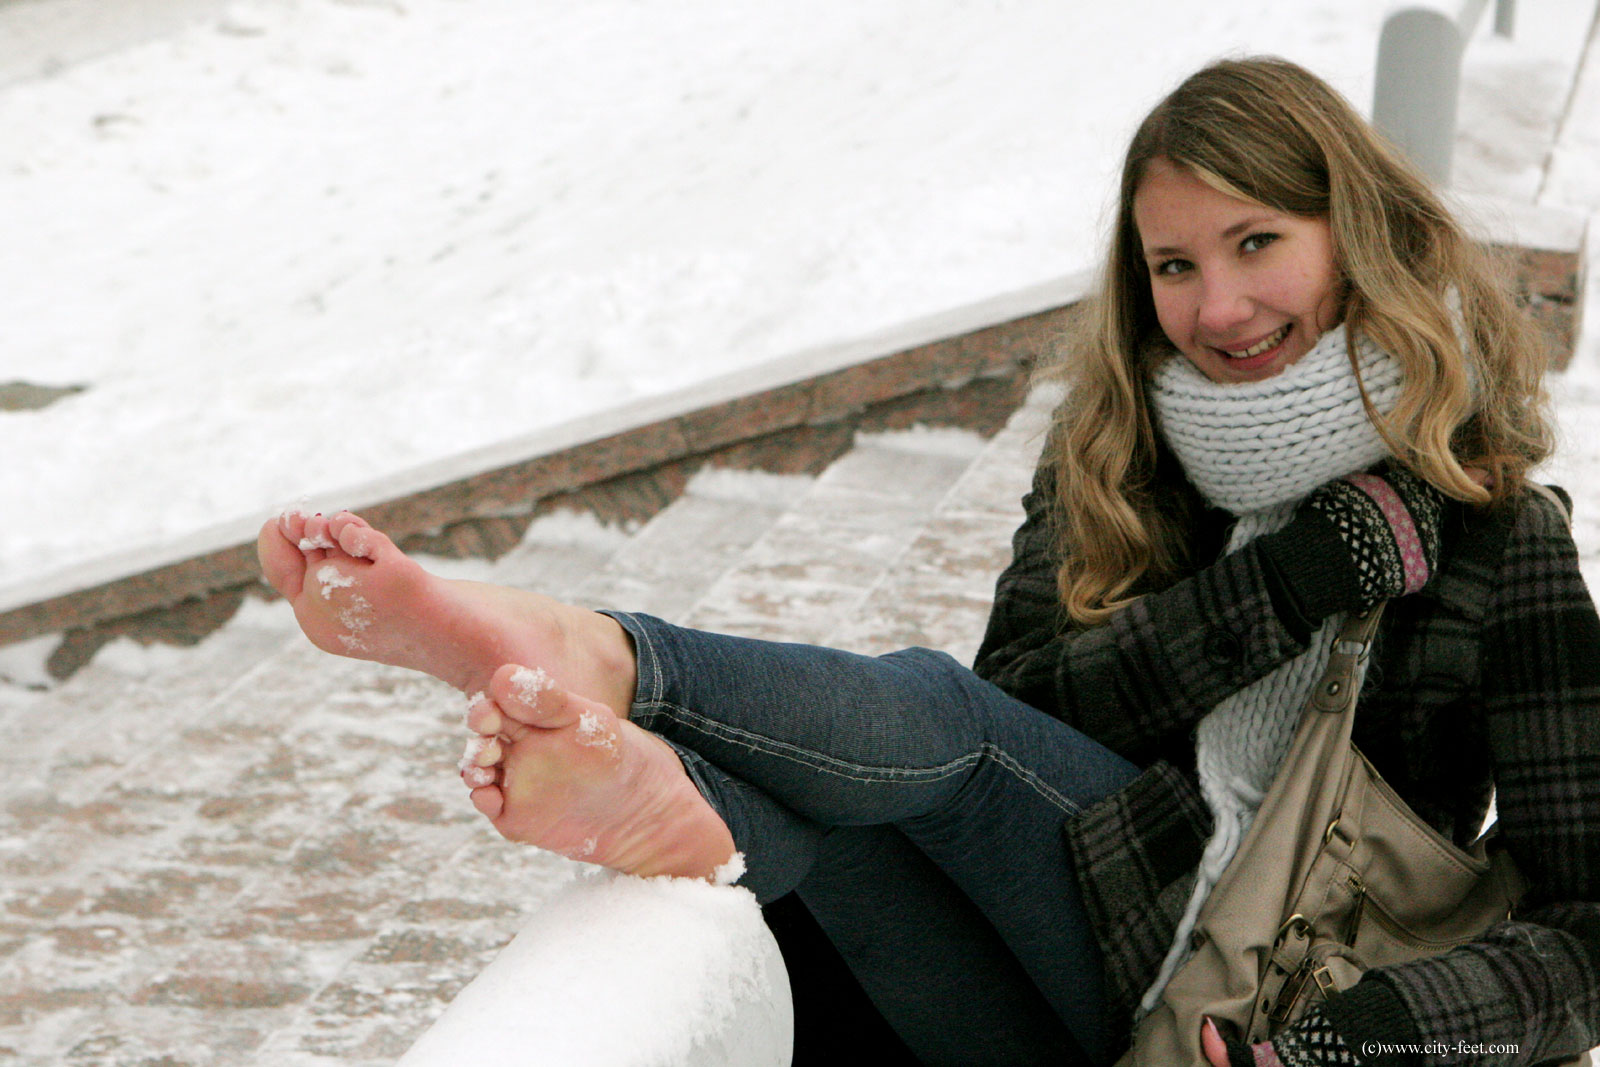 Foot Fetish Forum Barefoot Girl On The Snow